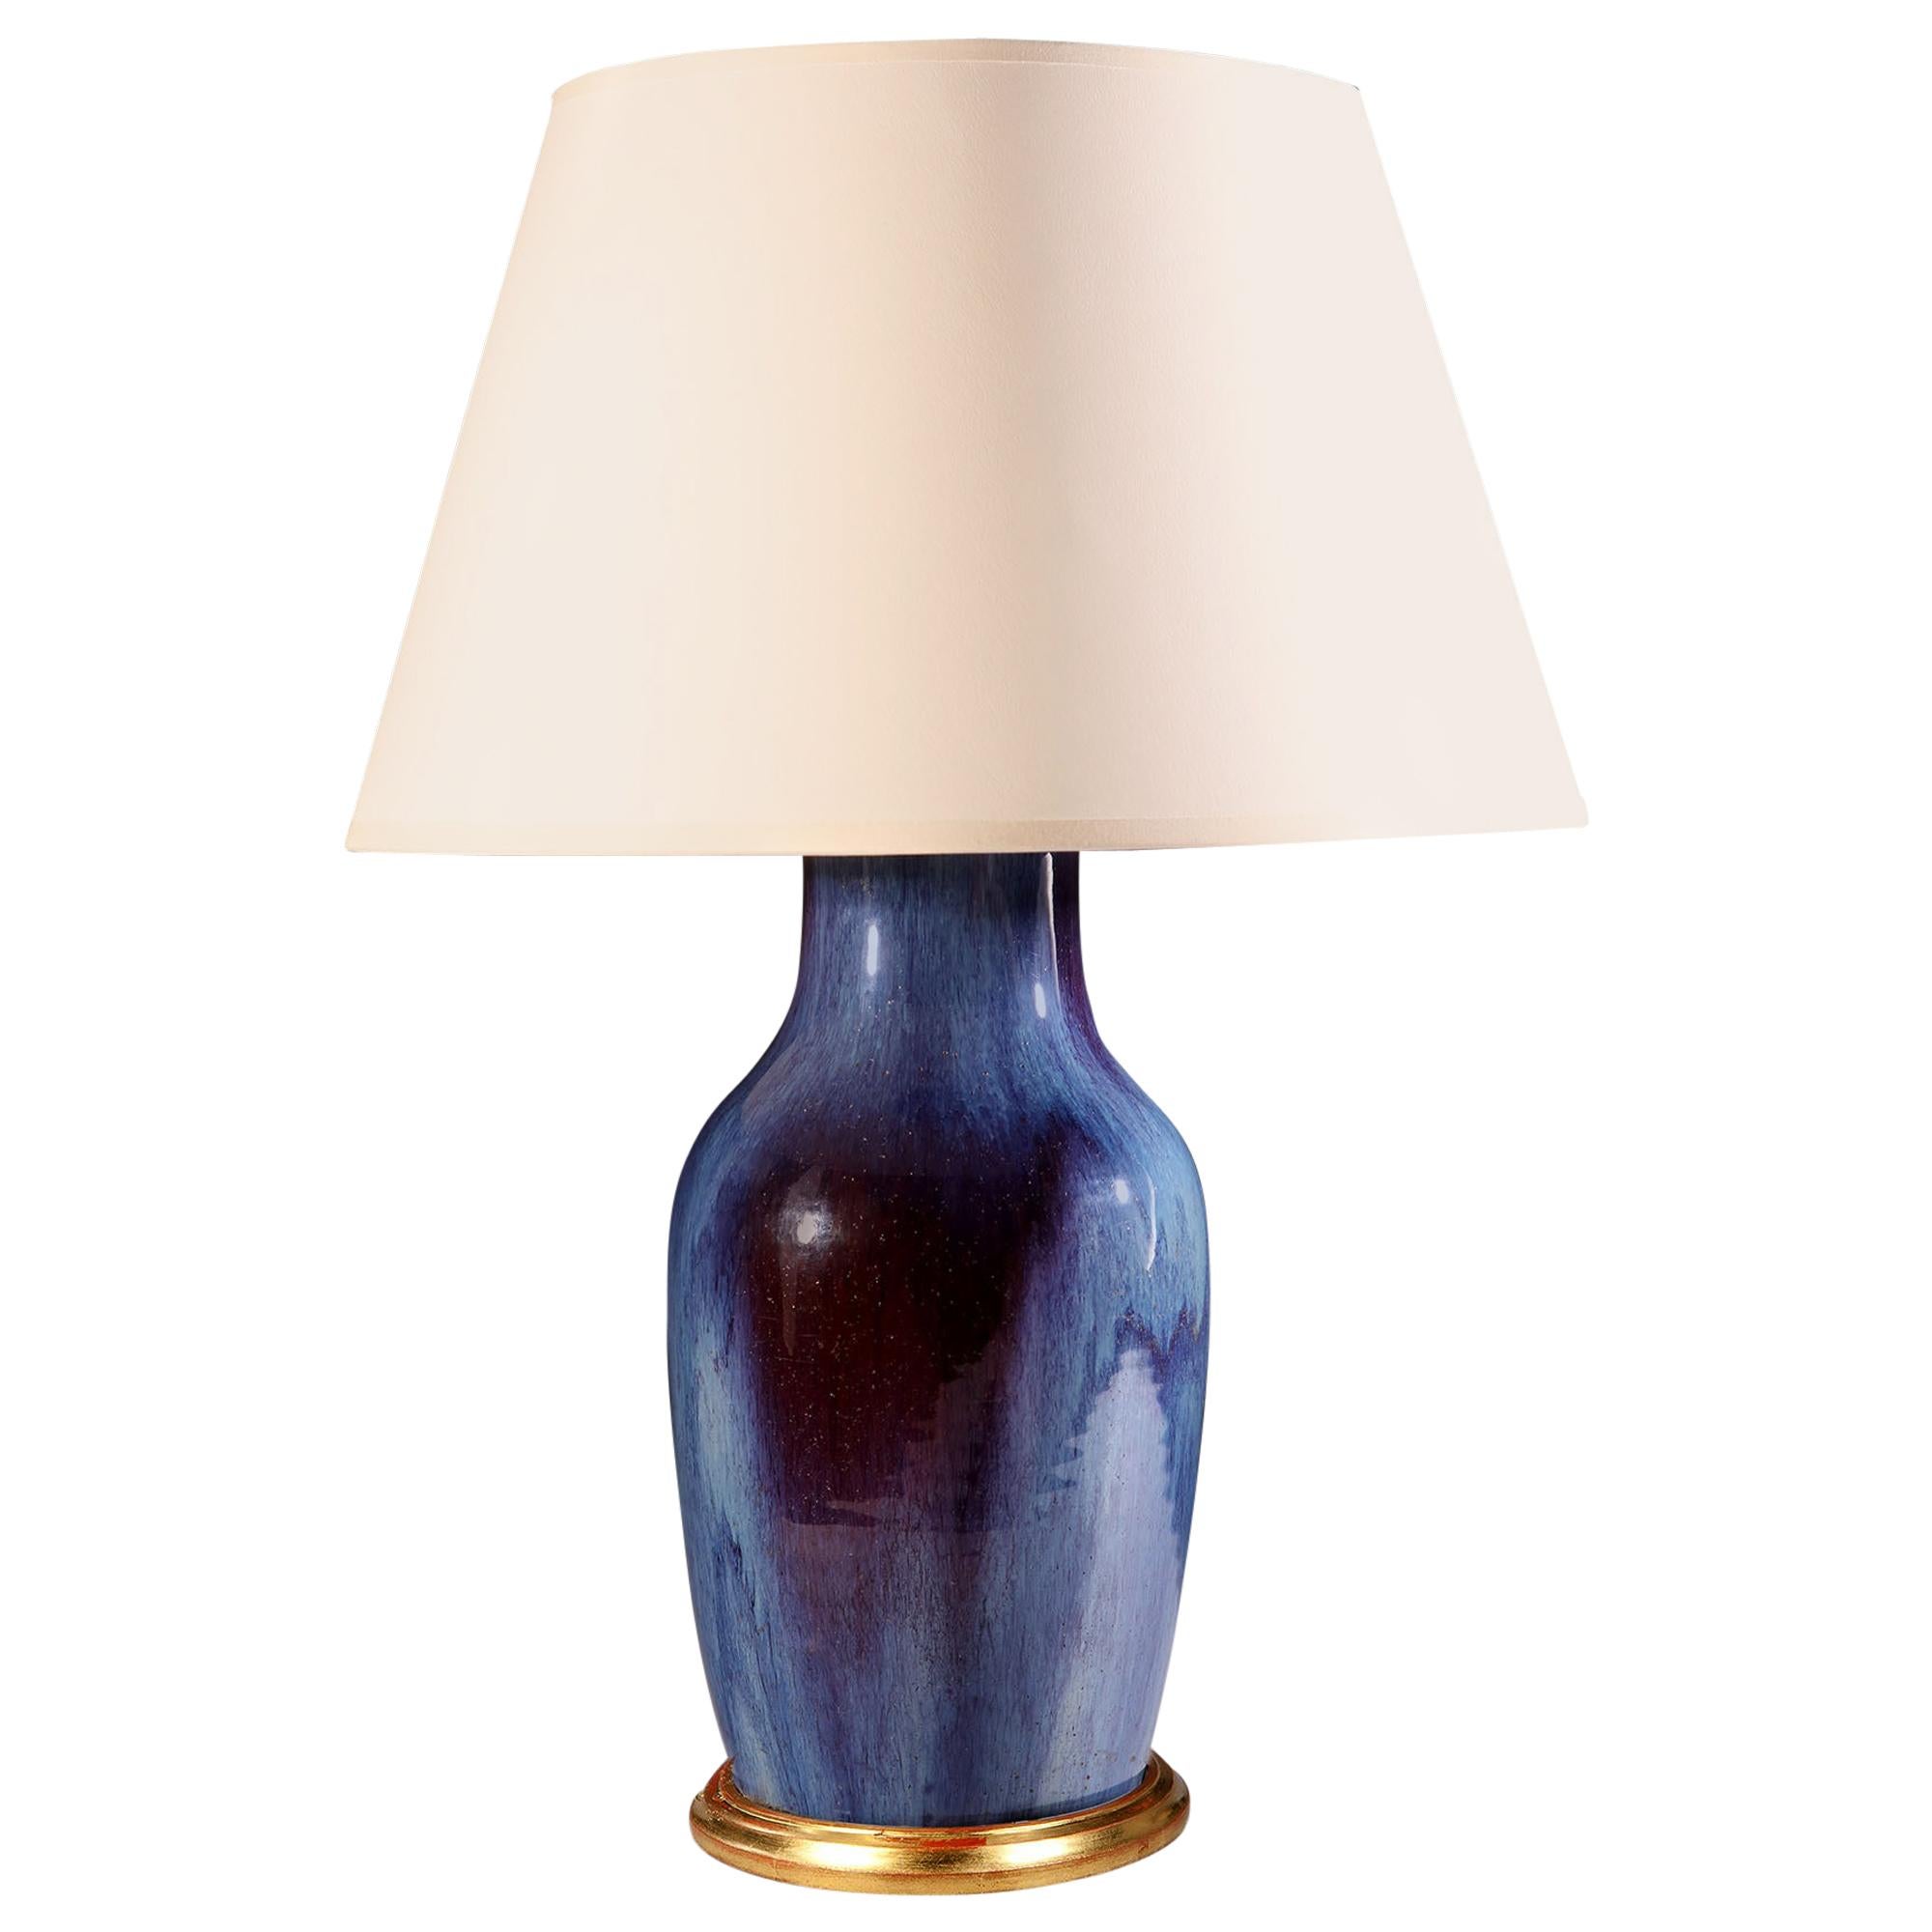 Early 20th Century Chinese Flambé Vase as a Table Lamp with Blue and Red Glaze